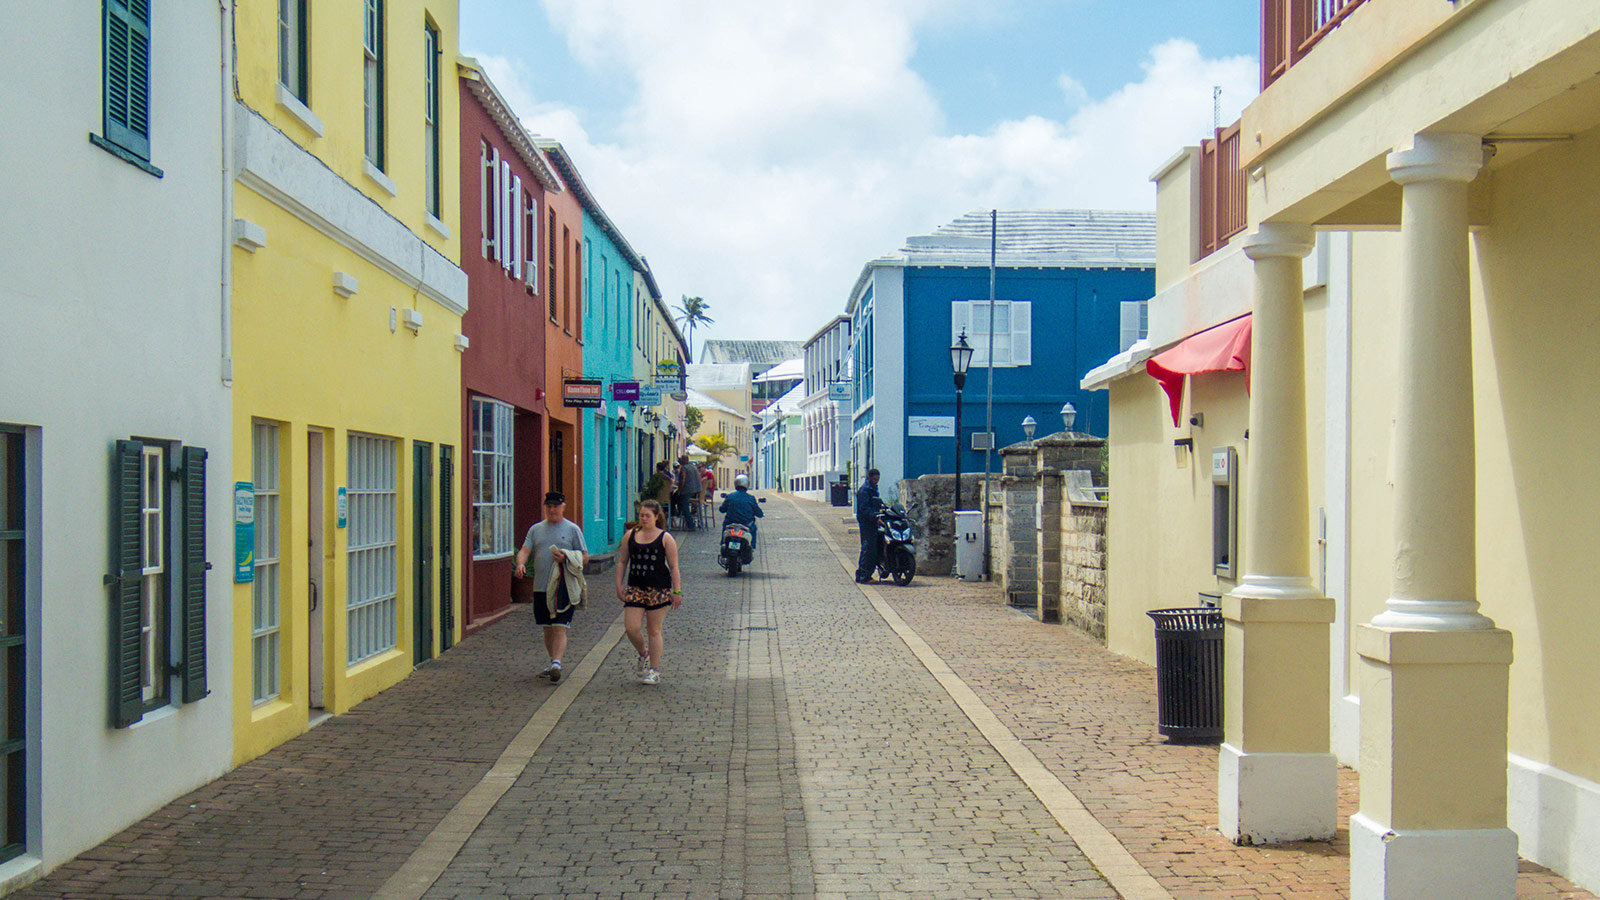 The colorful streets of St. George's Bermuda